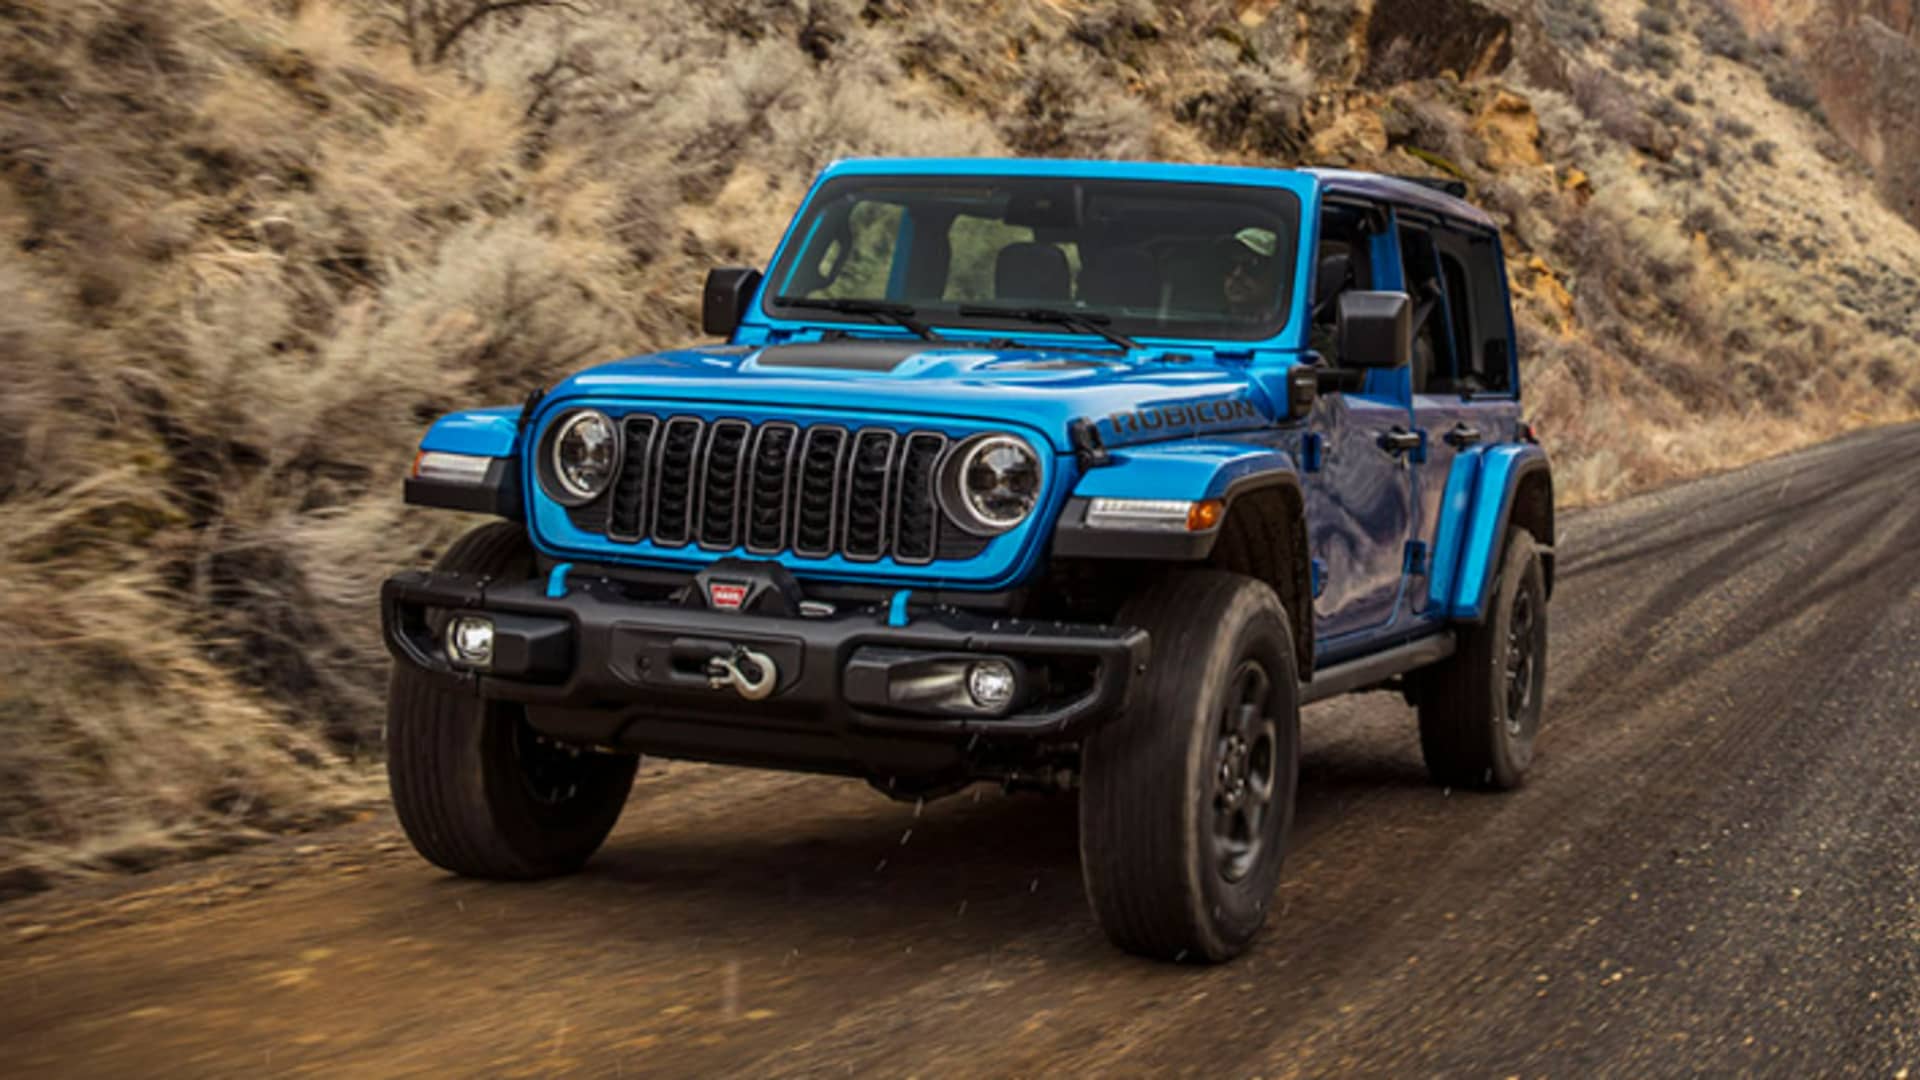 What are the 2021 Jeep Wrangler Configurations?